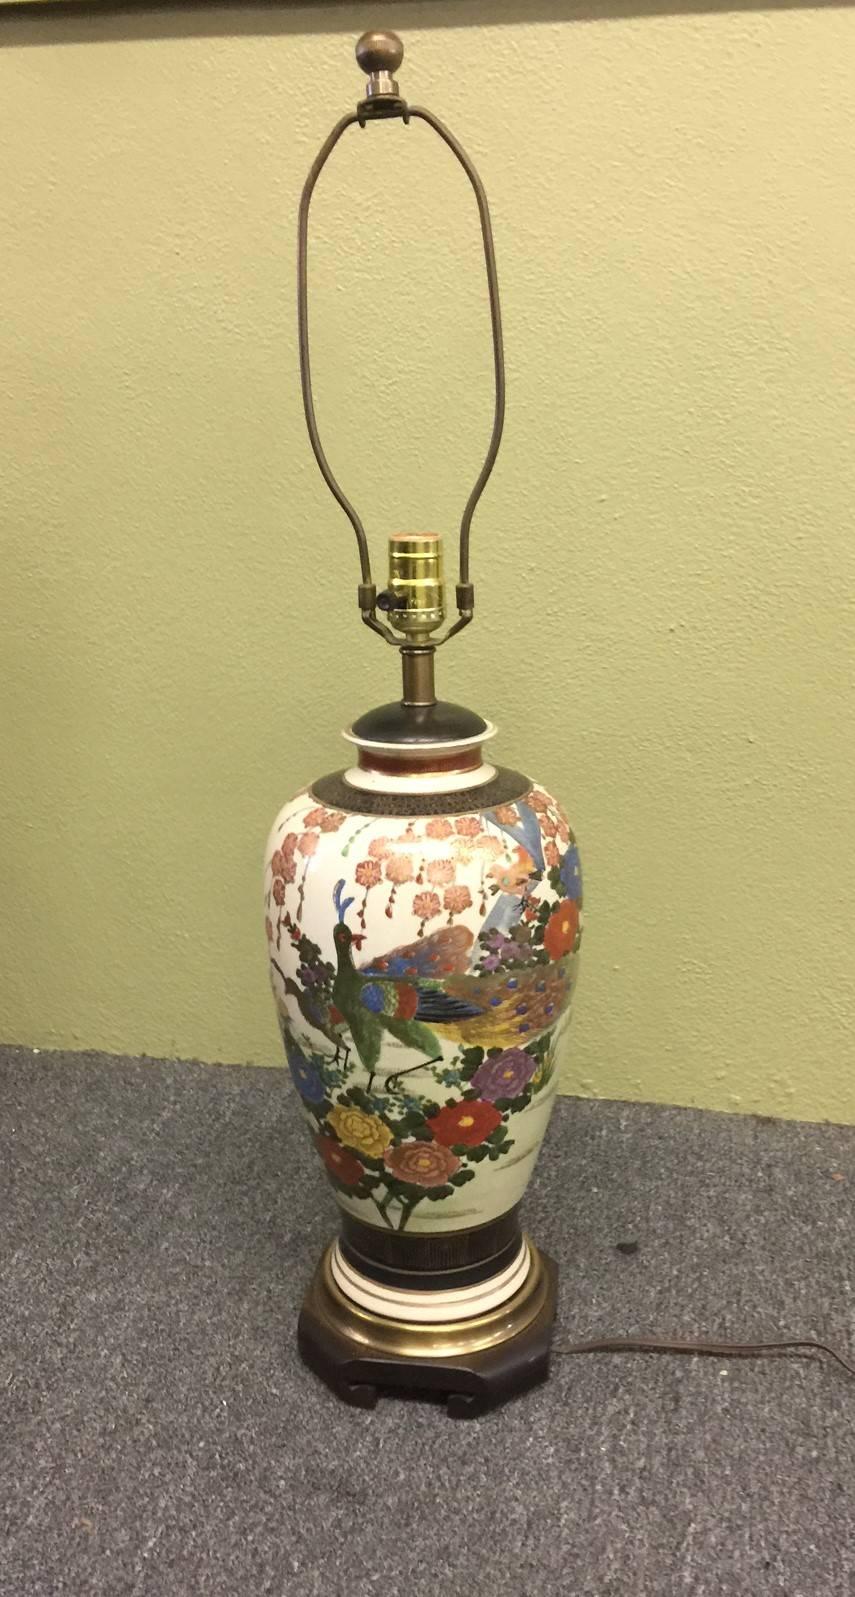 Japanese ginger jar style, hand-painted Satsuma (peacock) table lamp by Frederick Cooper. This stunning lamp sits on a carved wood base and has brass hardware, lid and finial. Wonderful piece!